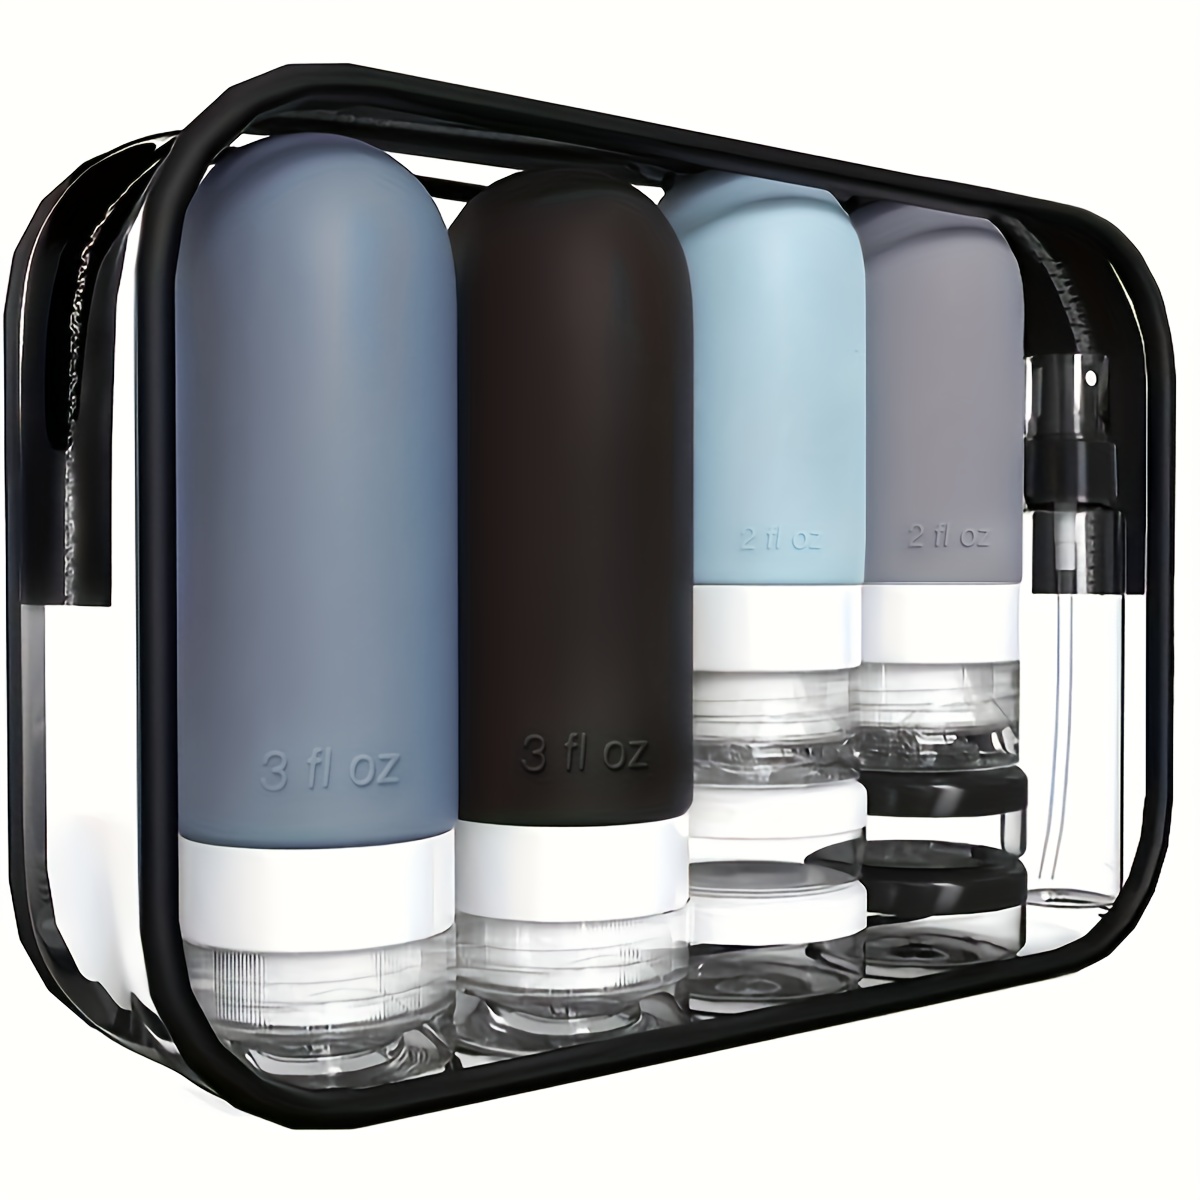 

16pcs/set, Travel Bottles For Toiletries, Tsa Approved Travel Size Containers For Toiletries, Shampoo And Conditioner Travel Bottles, Perfect For Business Or Personal Travel Essentials (bpa Free)